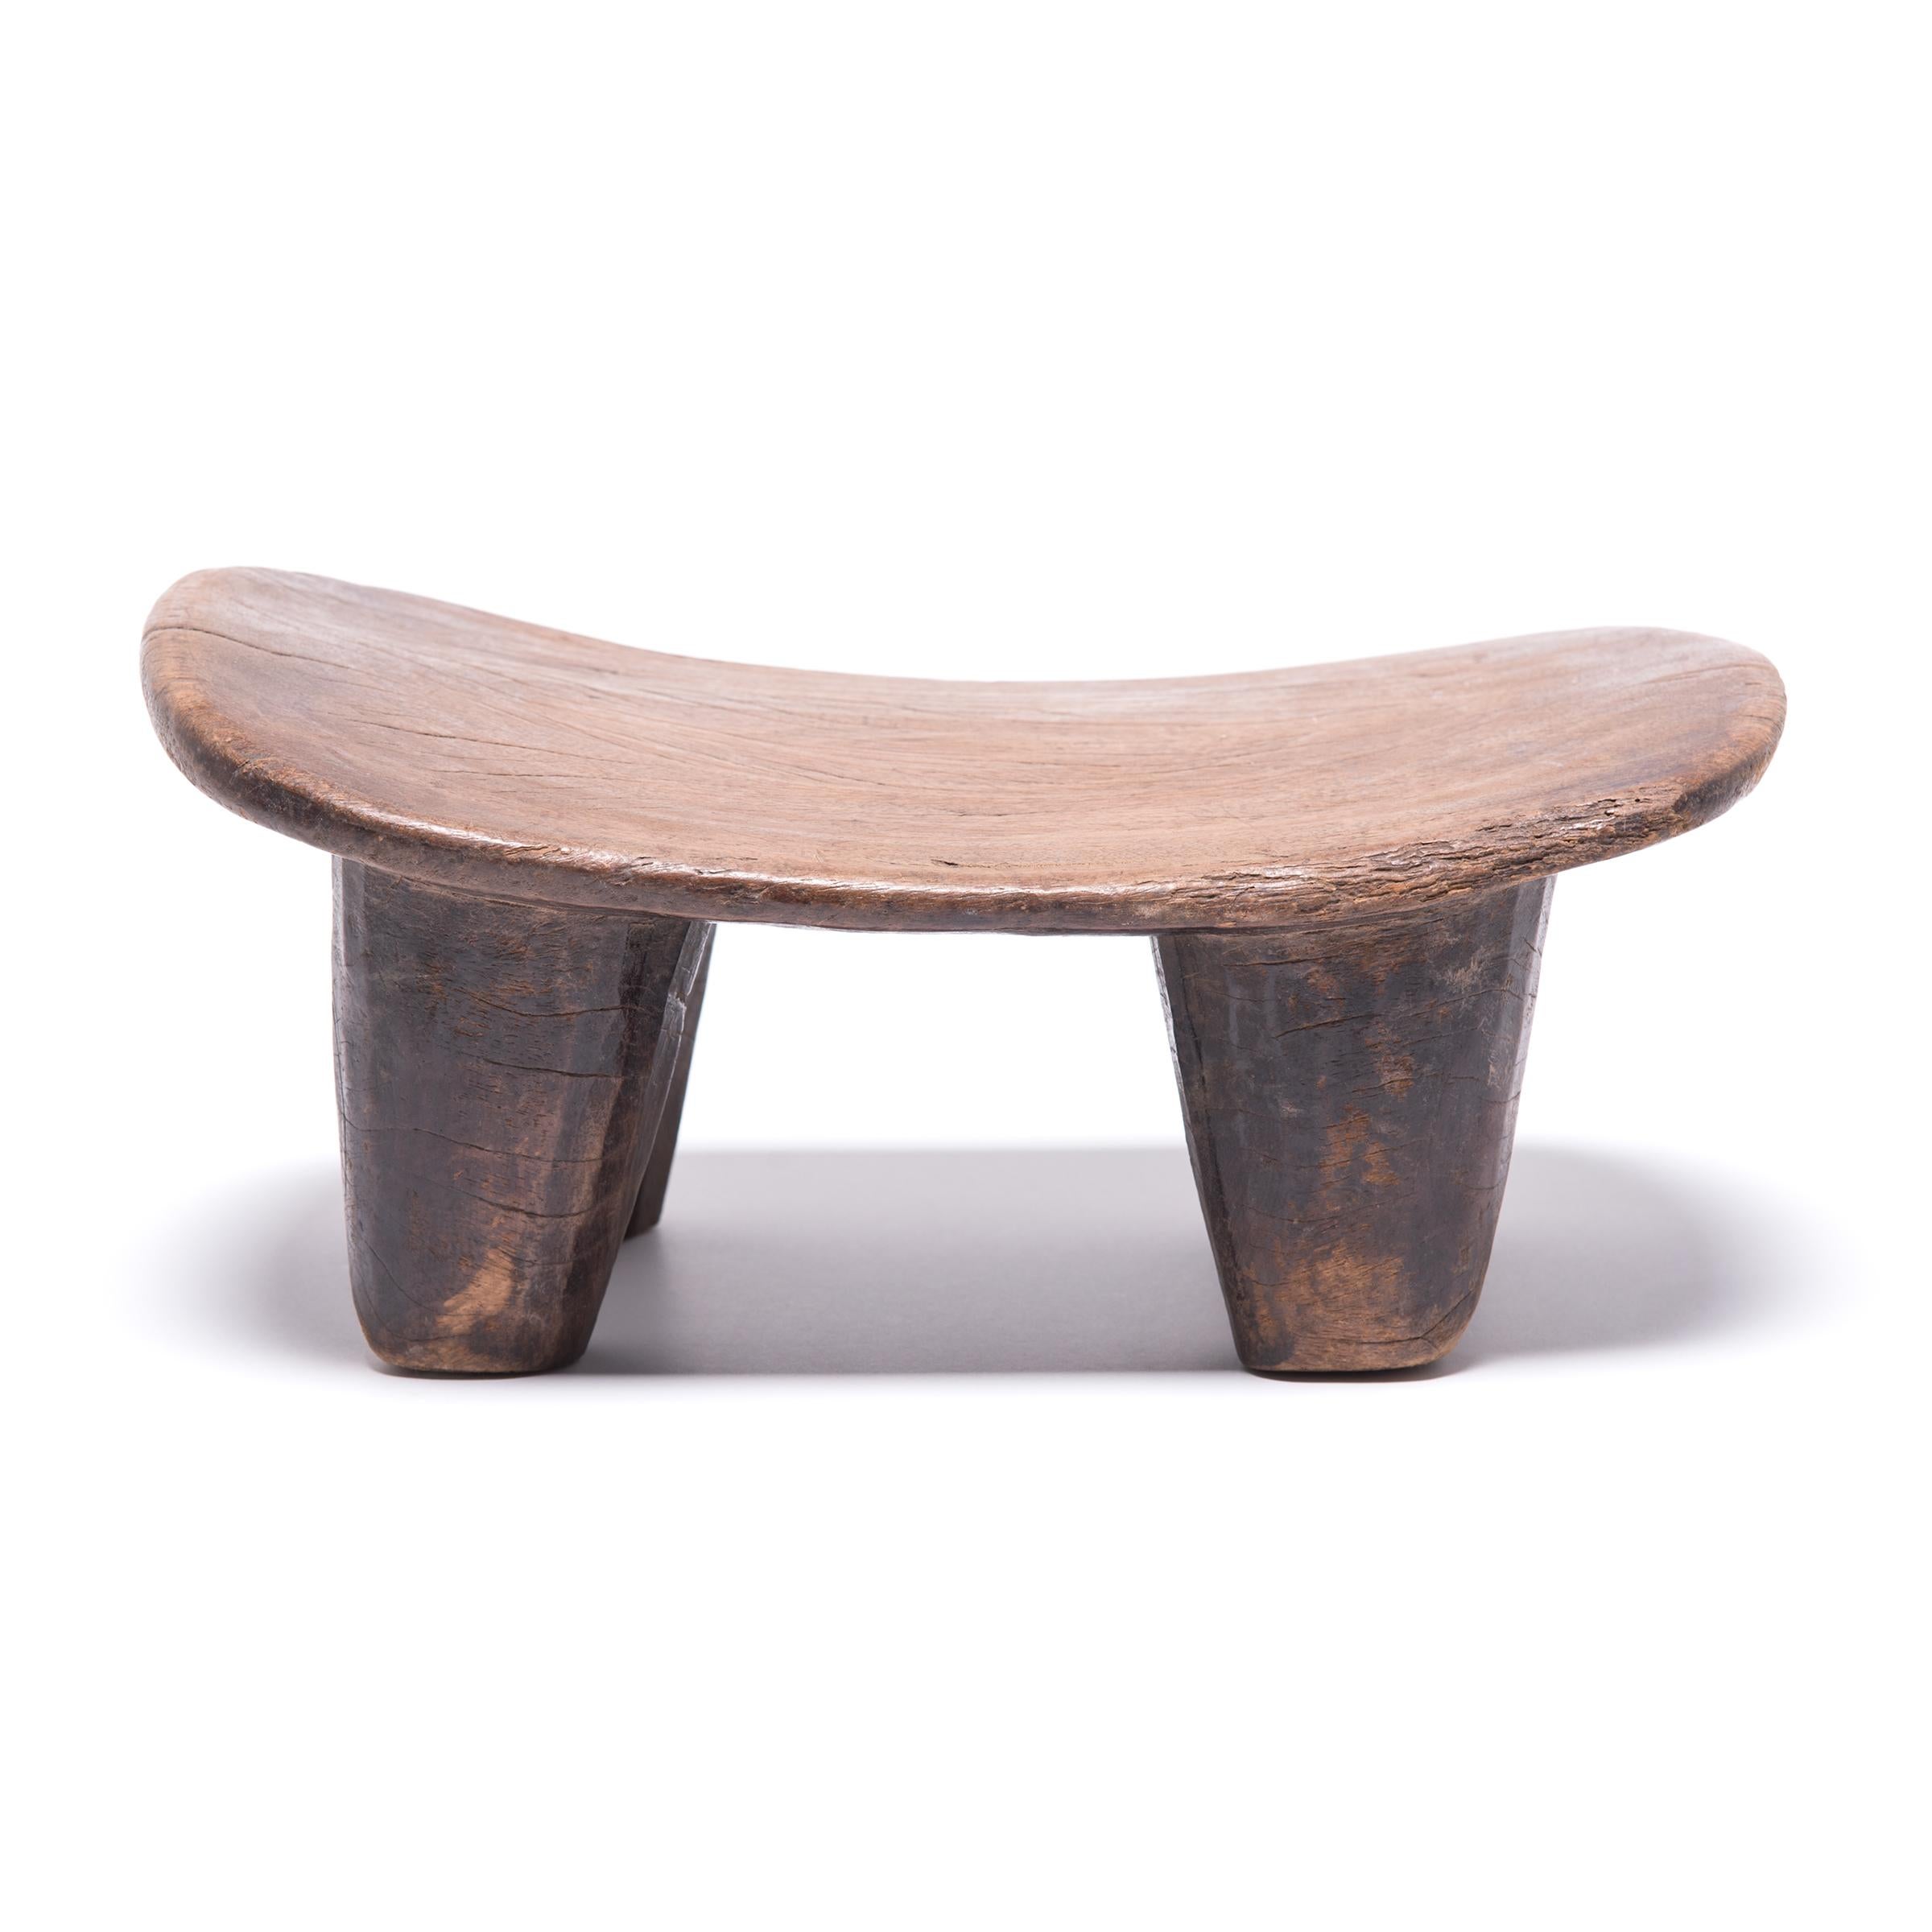 Hand-carved from a single, solid block of wood, each Senufo stool retains a unique personality as a modern sculpture, seat or table. The irregular strokes and diminutive nature are telltale signs of this traditional woodcarving practice. The